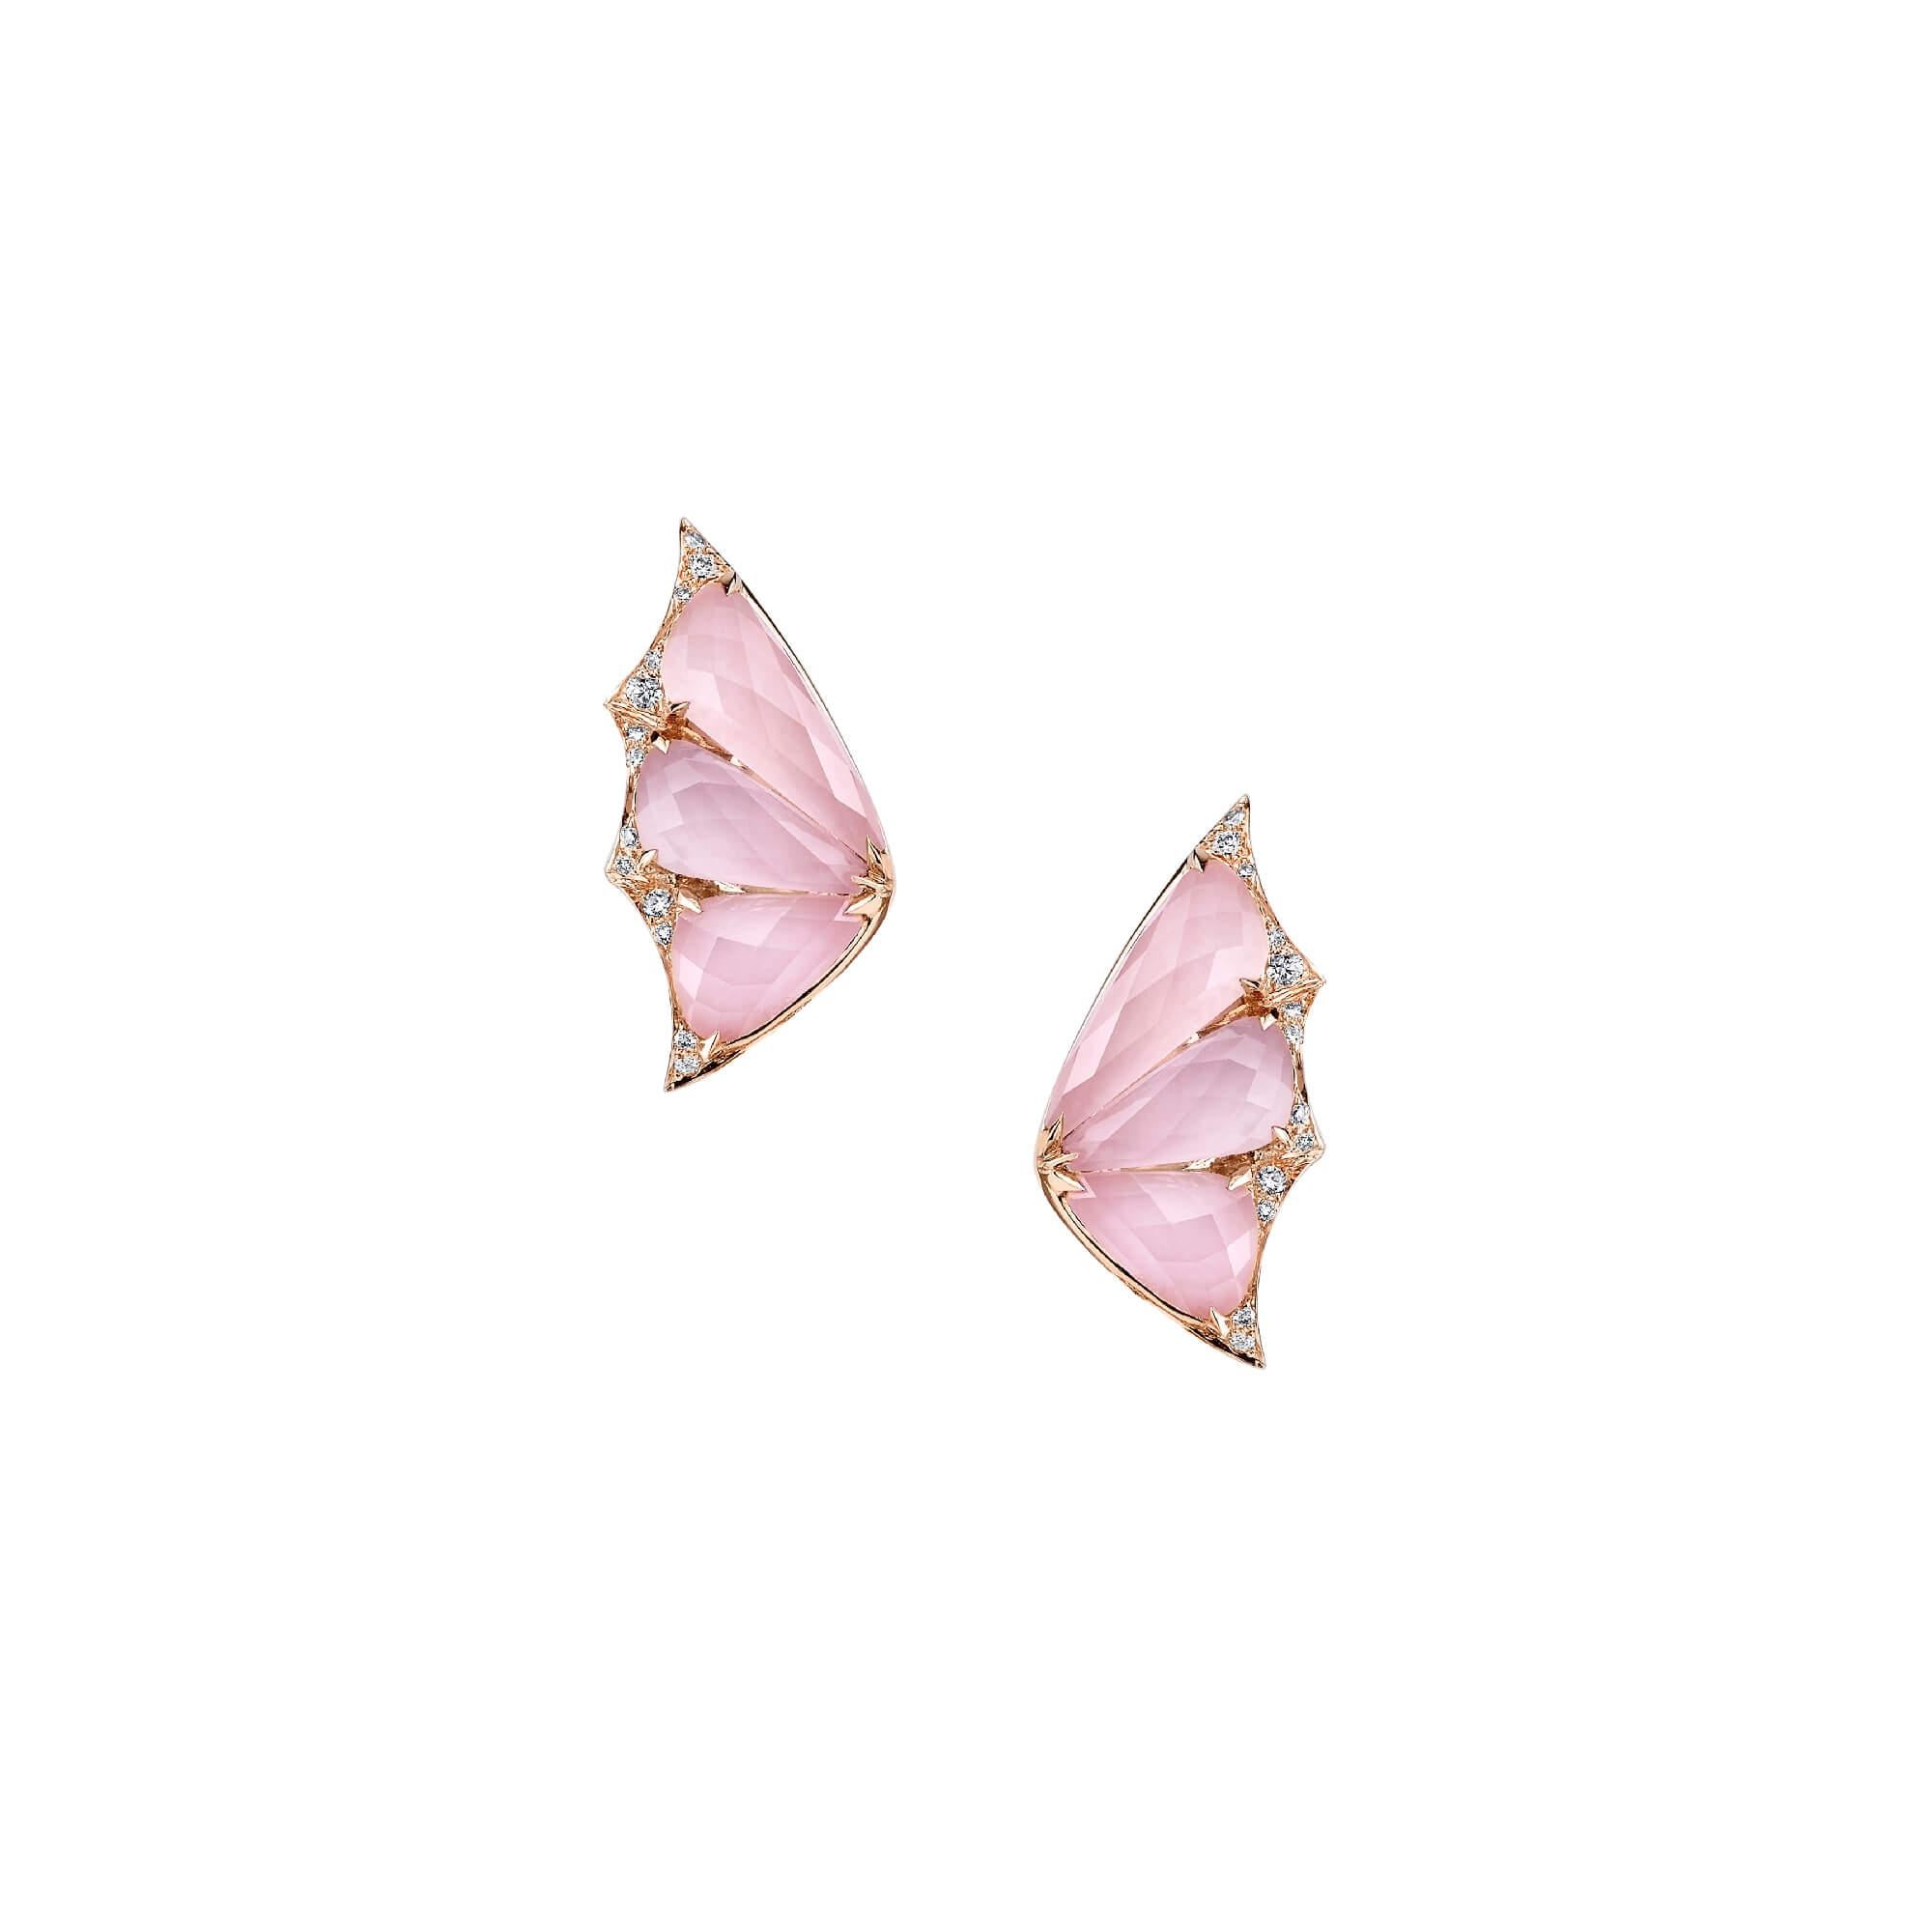 This pair of 'Fly By Night' Crystal Haze Long Earrings are handcrafted in 18ct rose gold, pink opal with clear quartz Crystal Haze (8.32ct) and 1.42 carat white diamond pavé. Wear them as a statement piece at an evening occasion and change your look